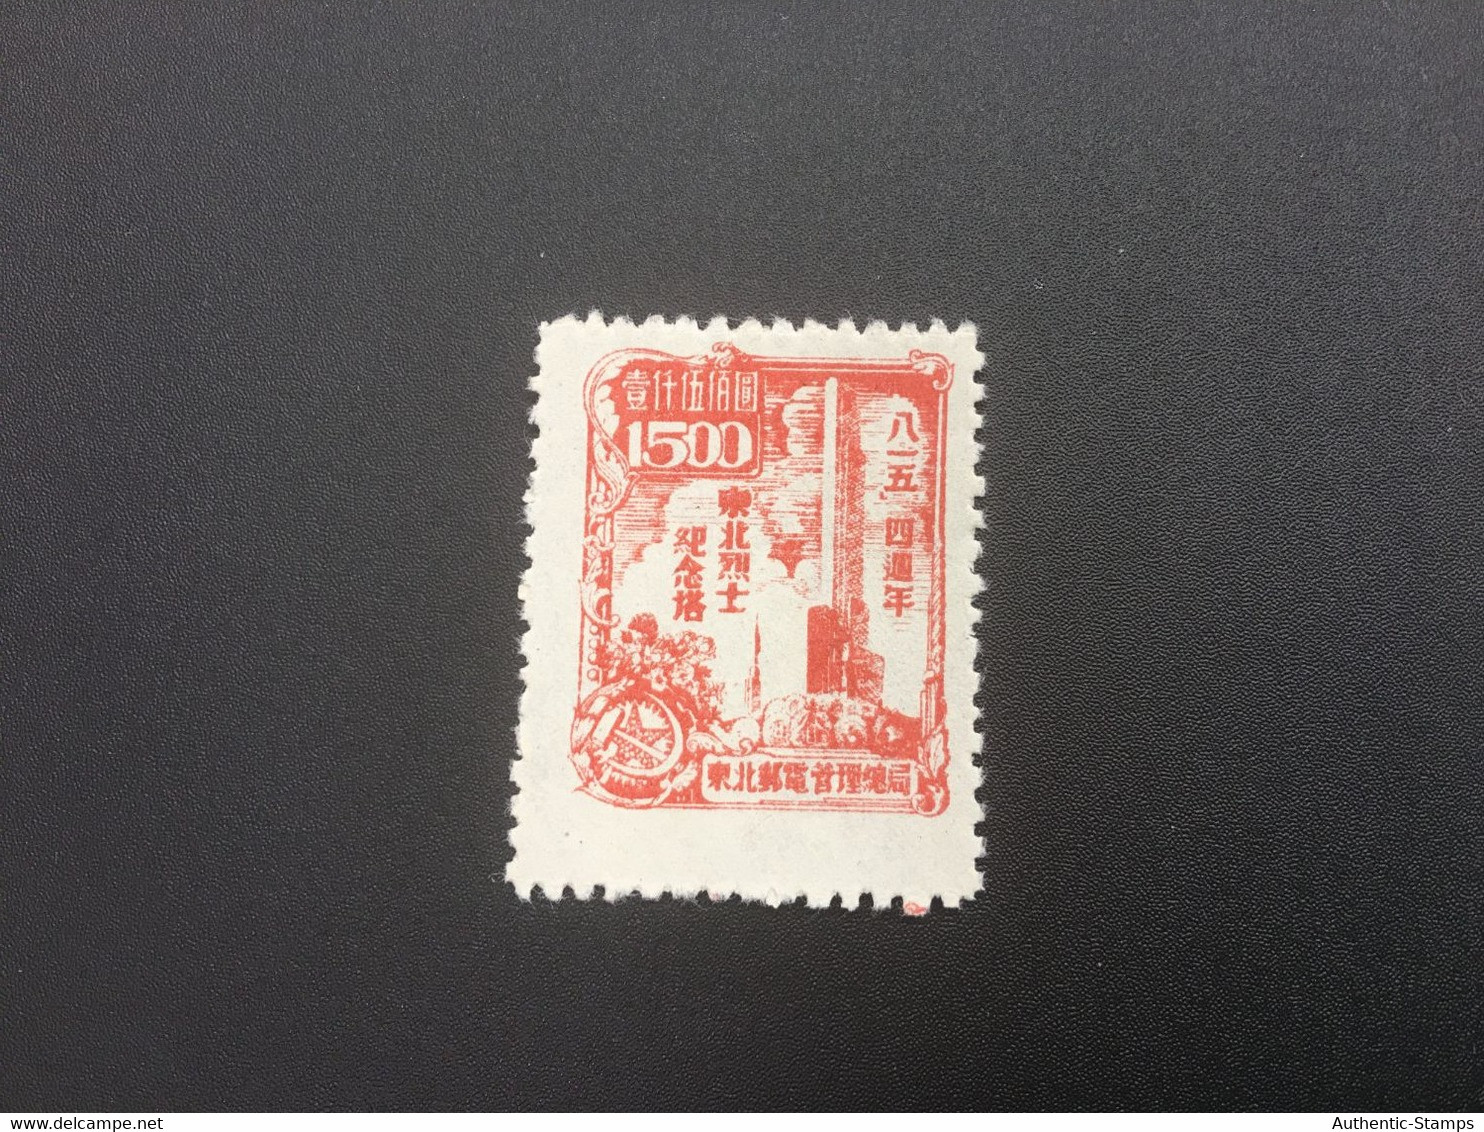 CHINA STAMP, UnUSED, TIMBRO, STEMPEL, CINA, CHINE, LIST 6165 - Chine Du Nord-Est 1946-48